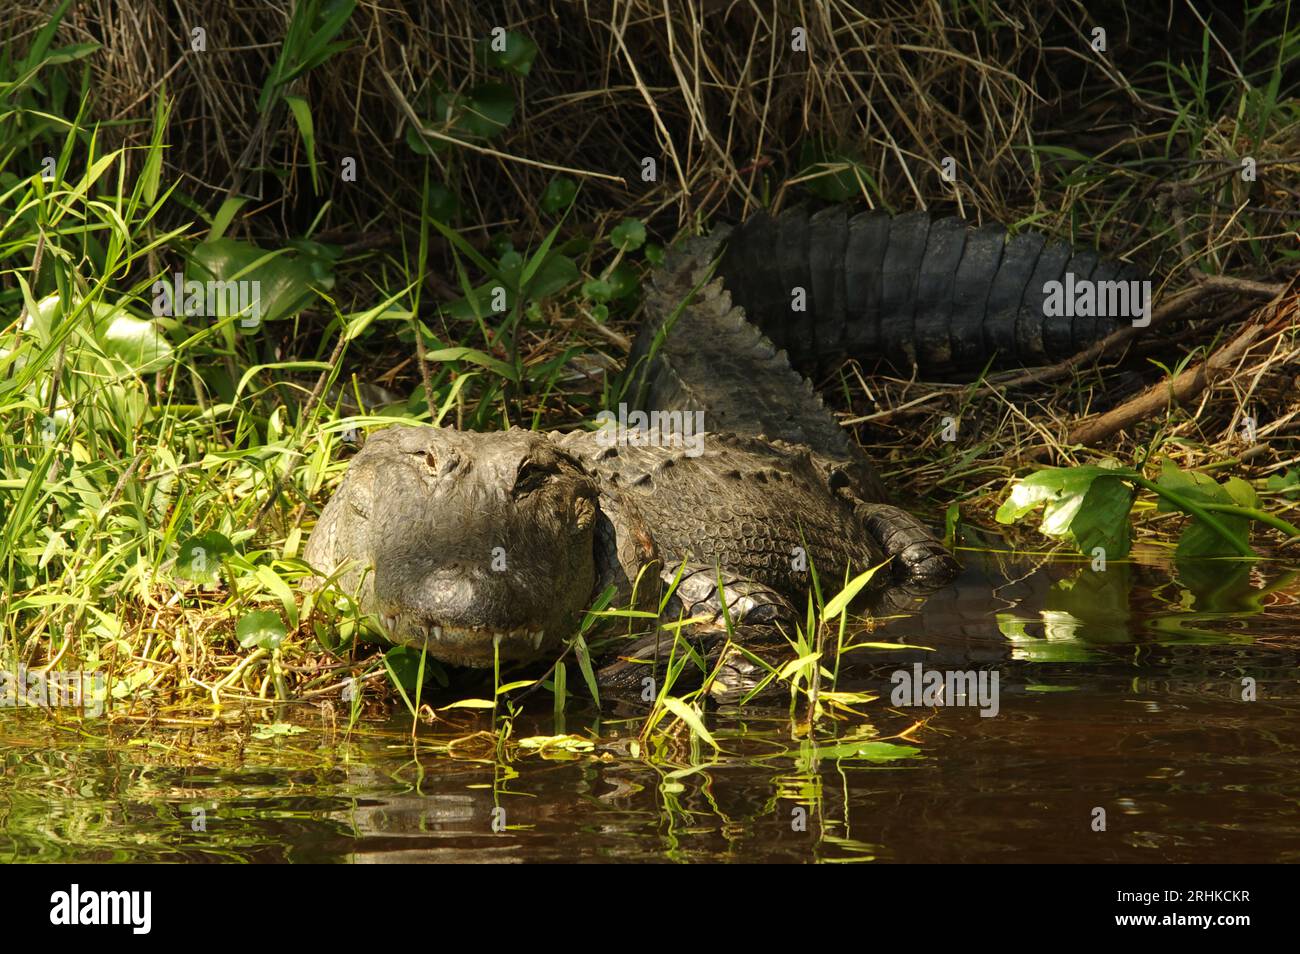 An American alligator (Alligator mississippiensis) suns itself in a marsh on the St. Johns River in Lake County, Florida. Stock Photo